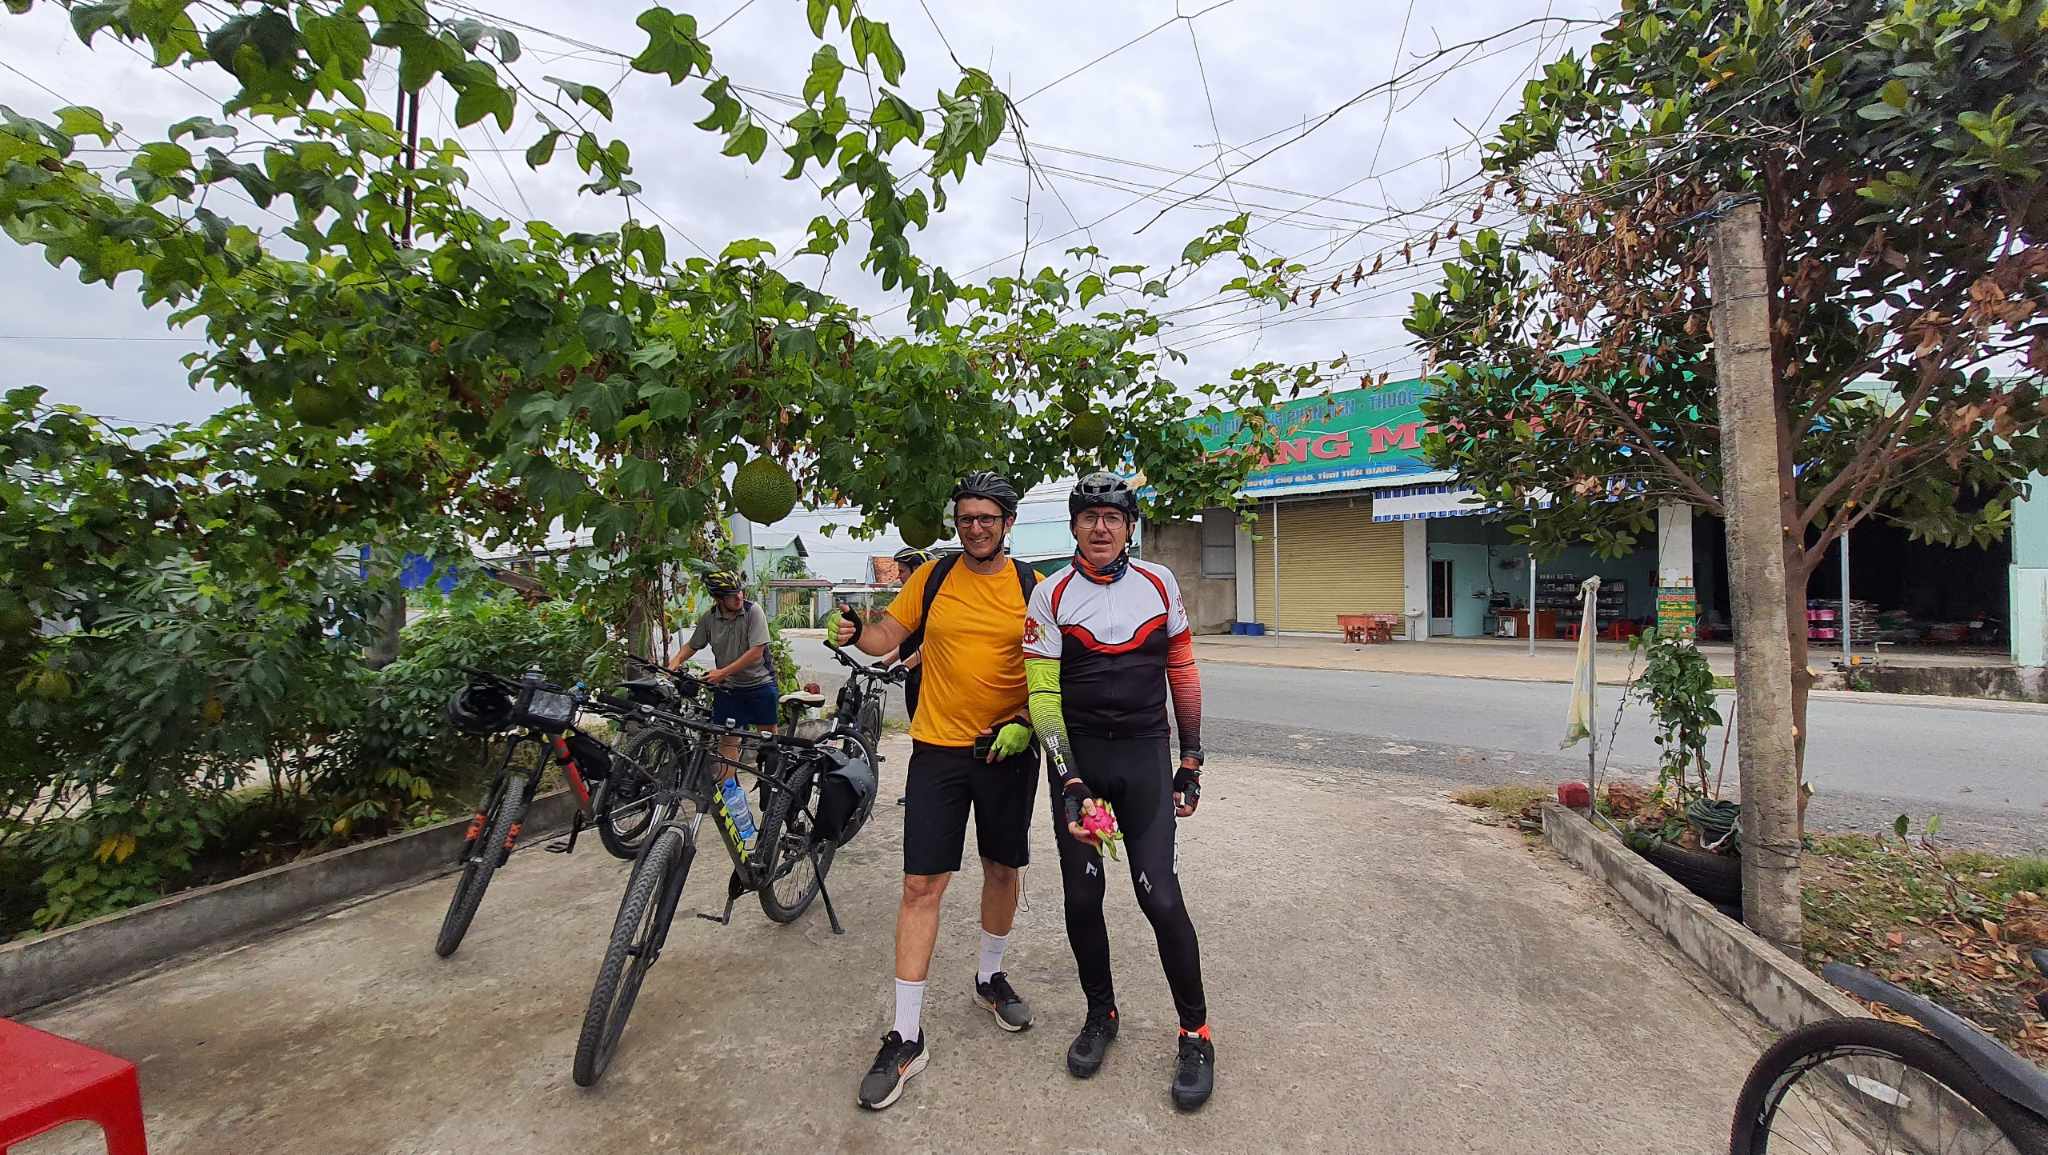 Ray Kuschert (right), hailing from Australia, enjoys a cycling excursion with friends in My Tho, Tien Giang Province, Mekong Delta, Vietnam. Photo: Ray Kuschert